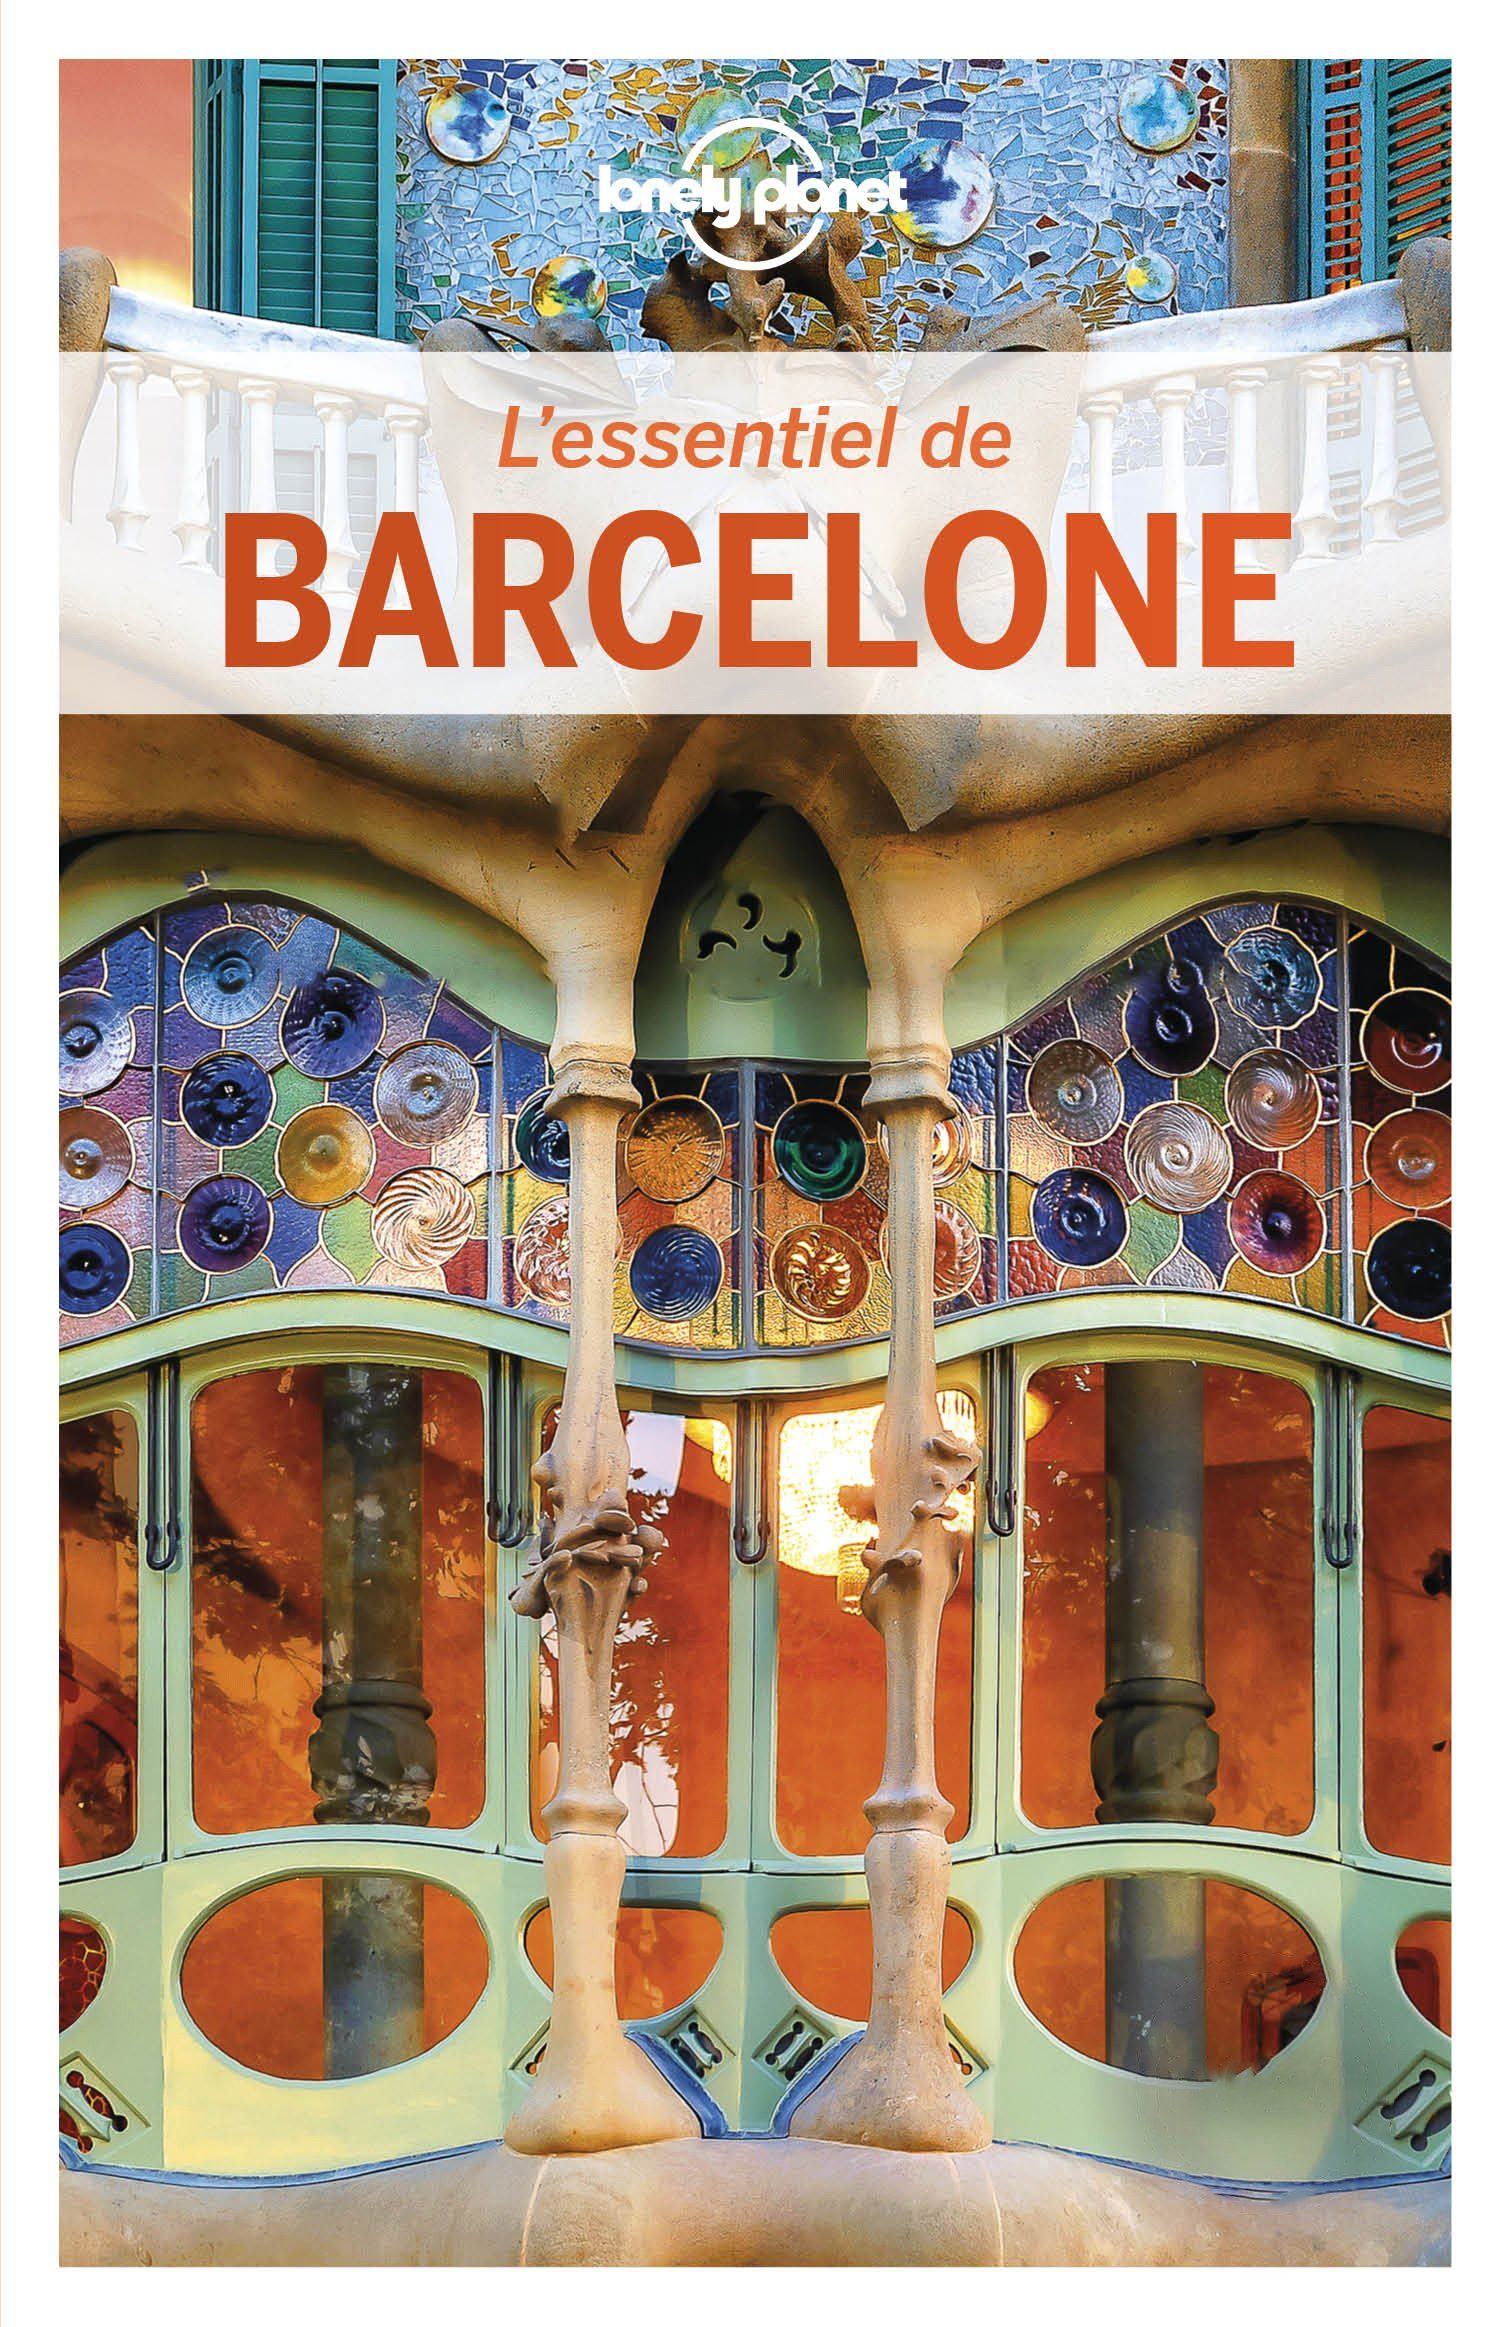 The　Travel　of　MapsCompany　Pla　and　Guide　Essentials　2020　Lonely　Barcelona　Edition　hiking　–　Travel　maps